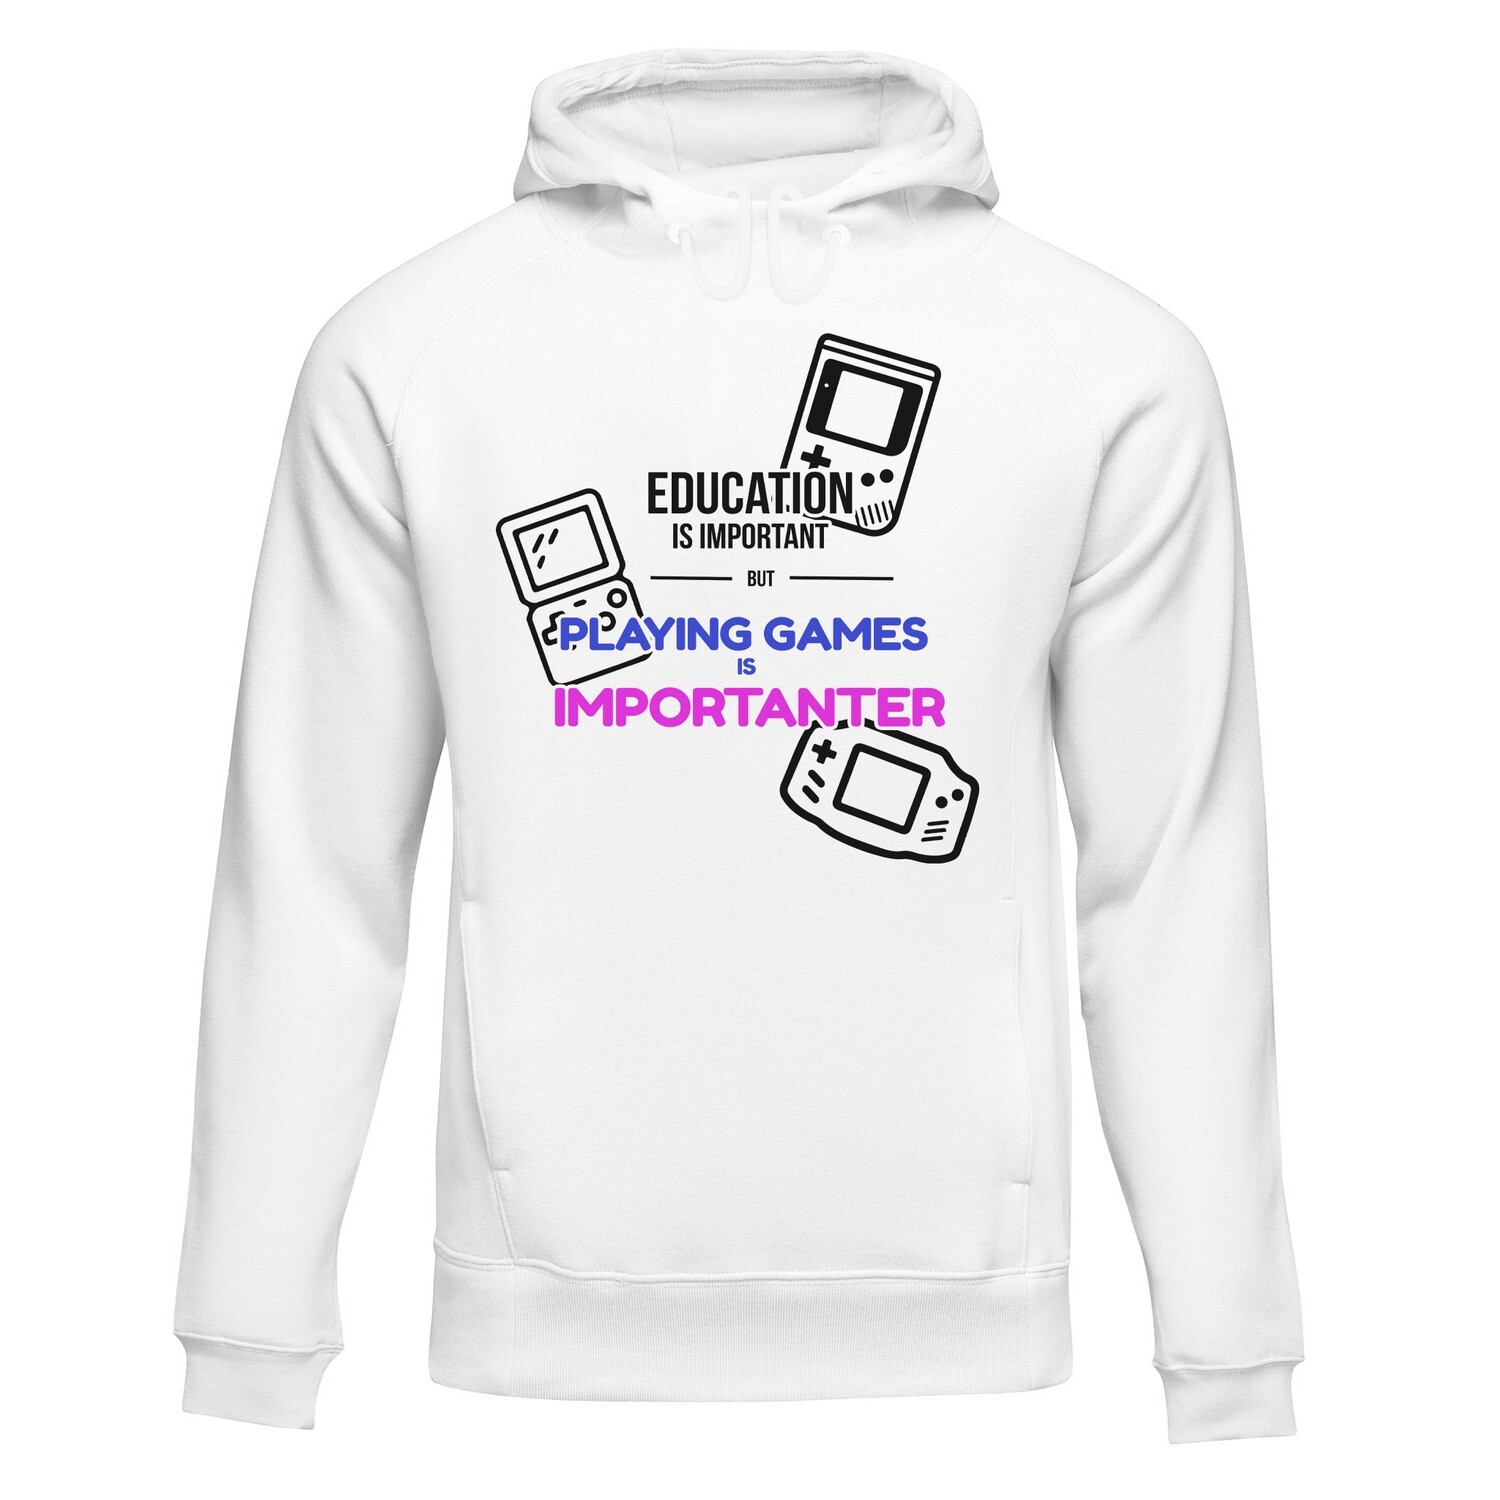 College Hoodie (Playing Games is Importanter)